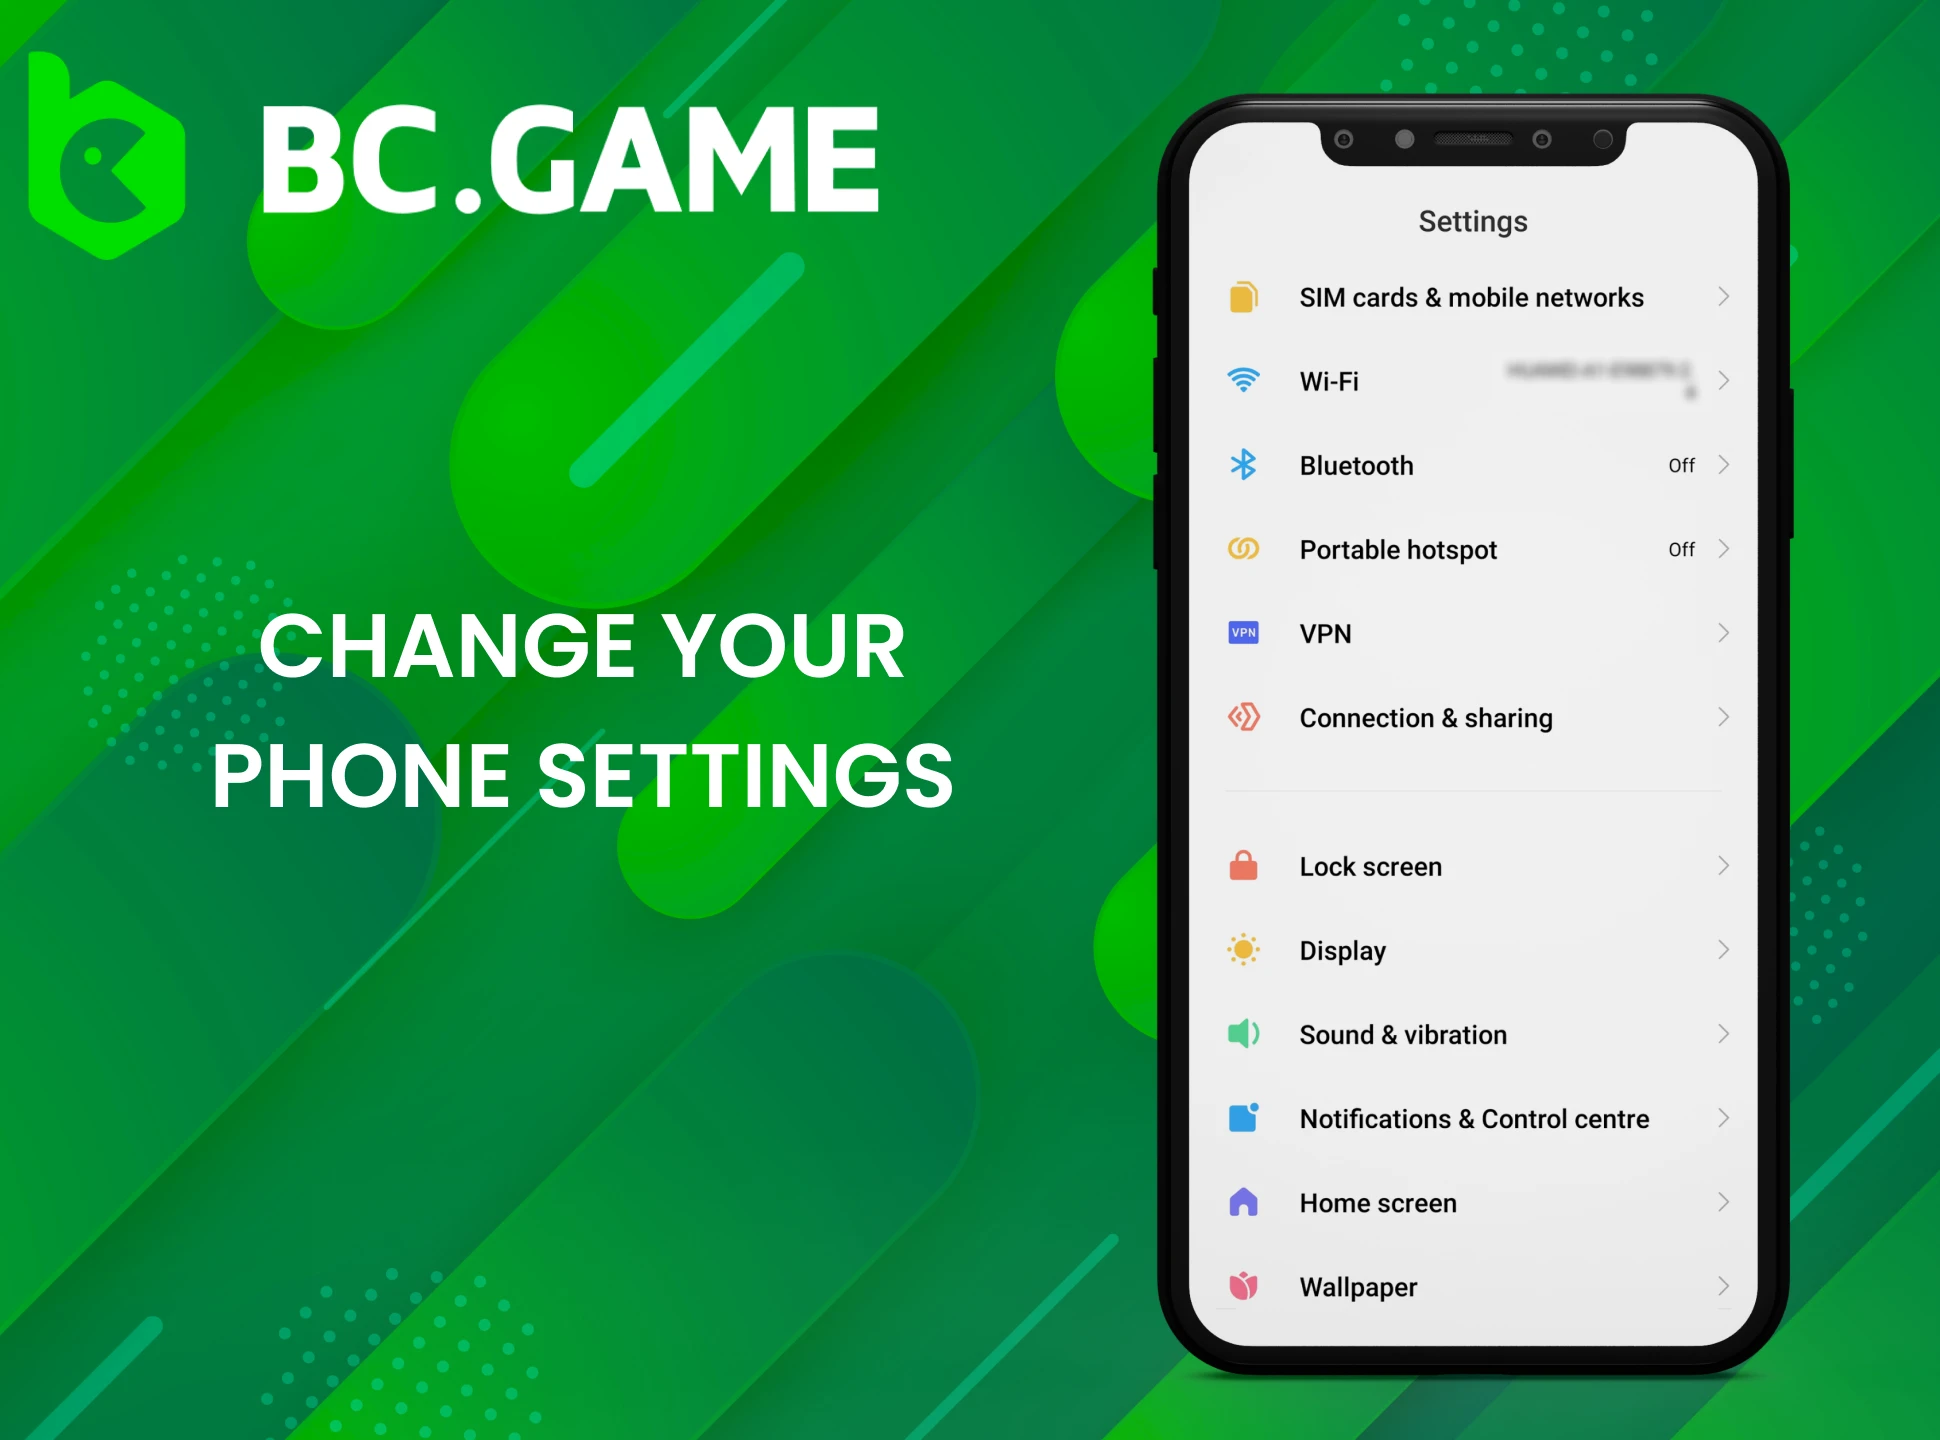 To download the BC Game app on your Android device, change your phone settings.